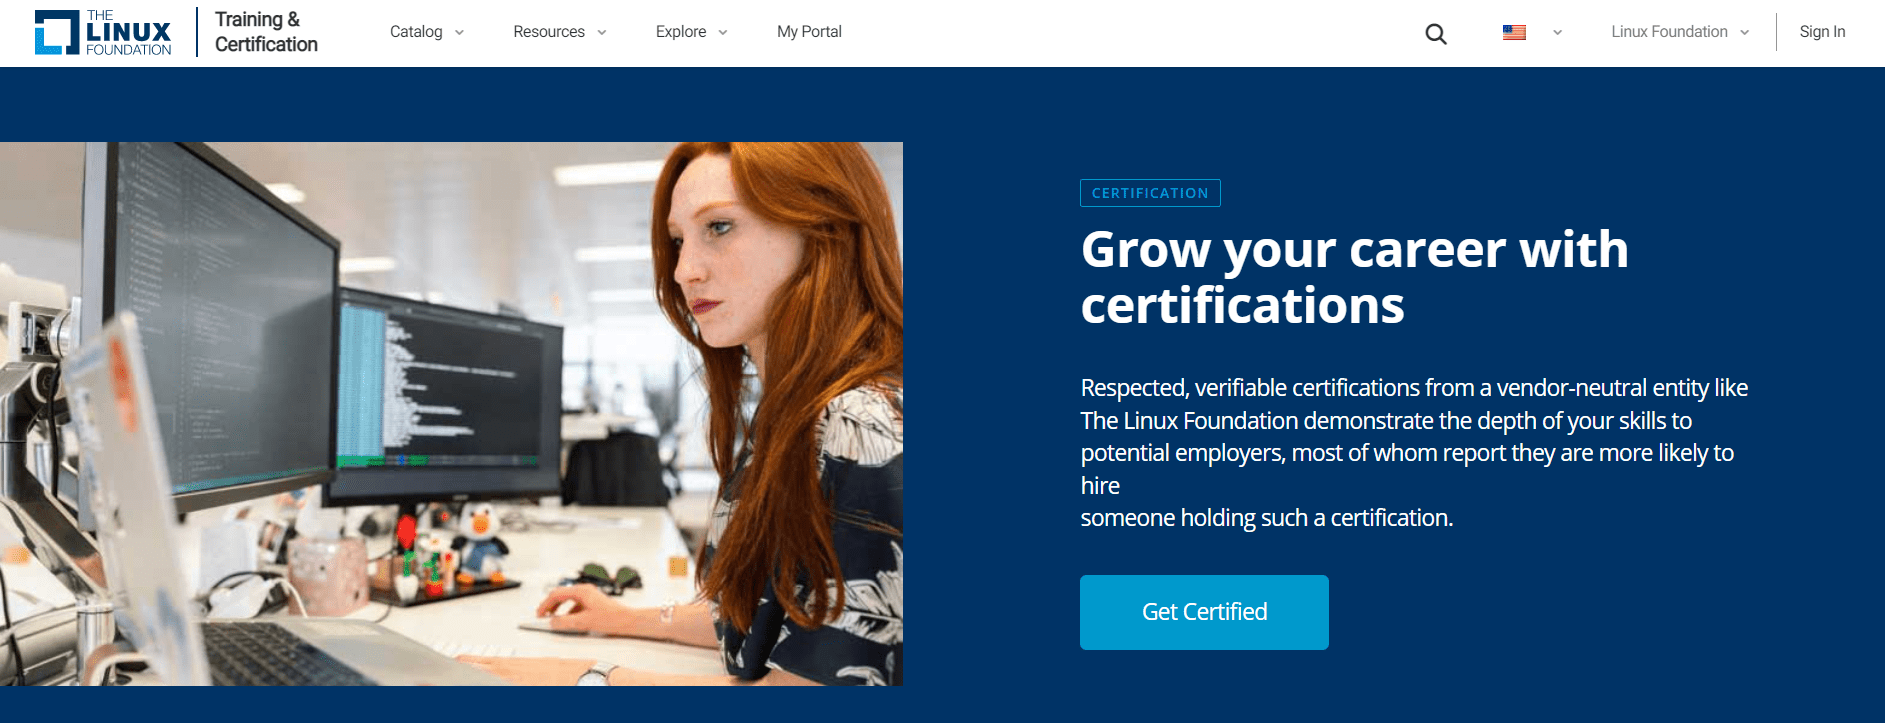 Grow your career with certifications